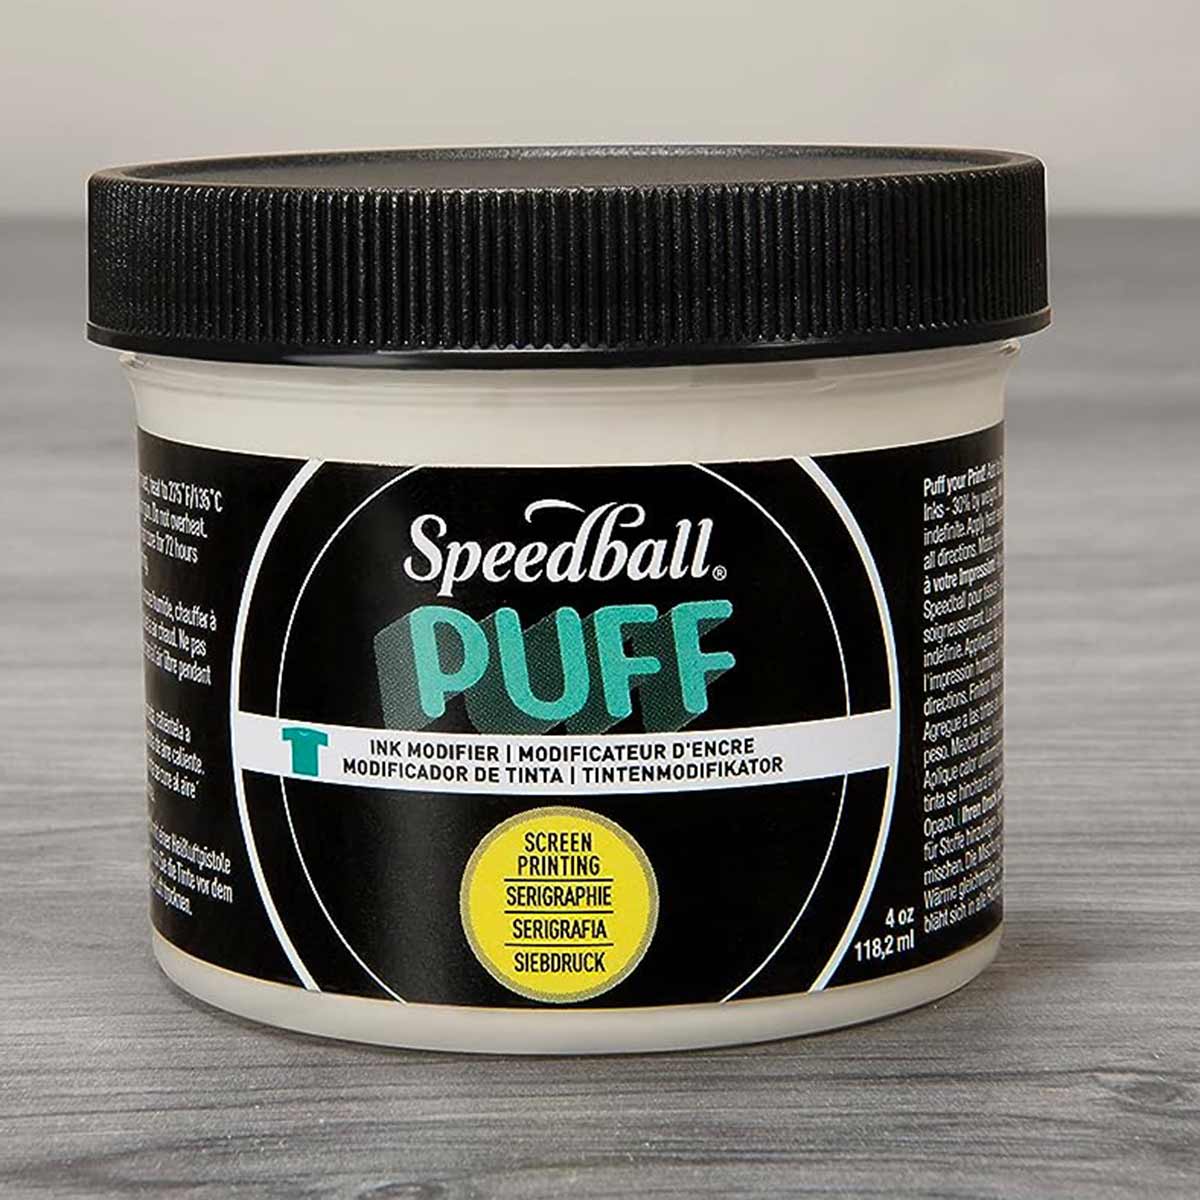 Speedball - Puff Ink Modifier for Fabric Screen Printing Ink